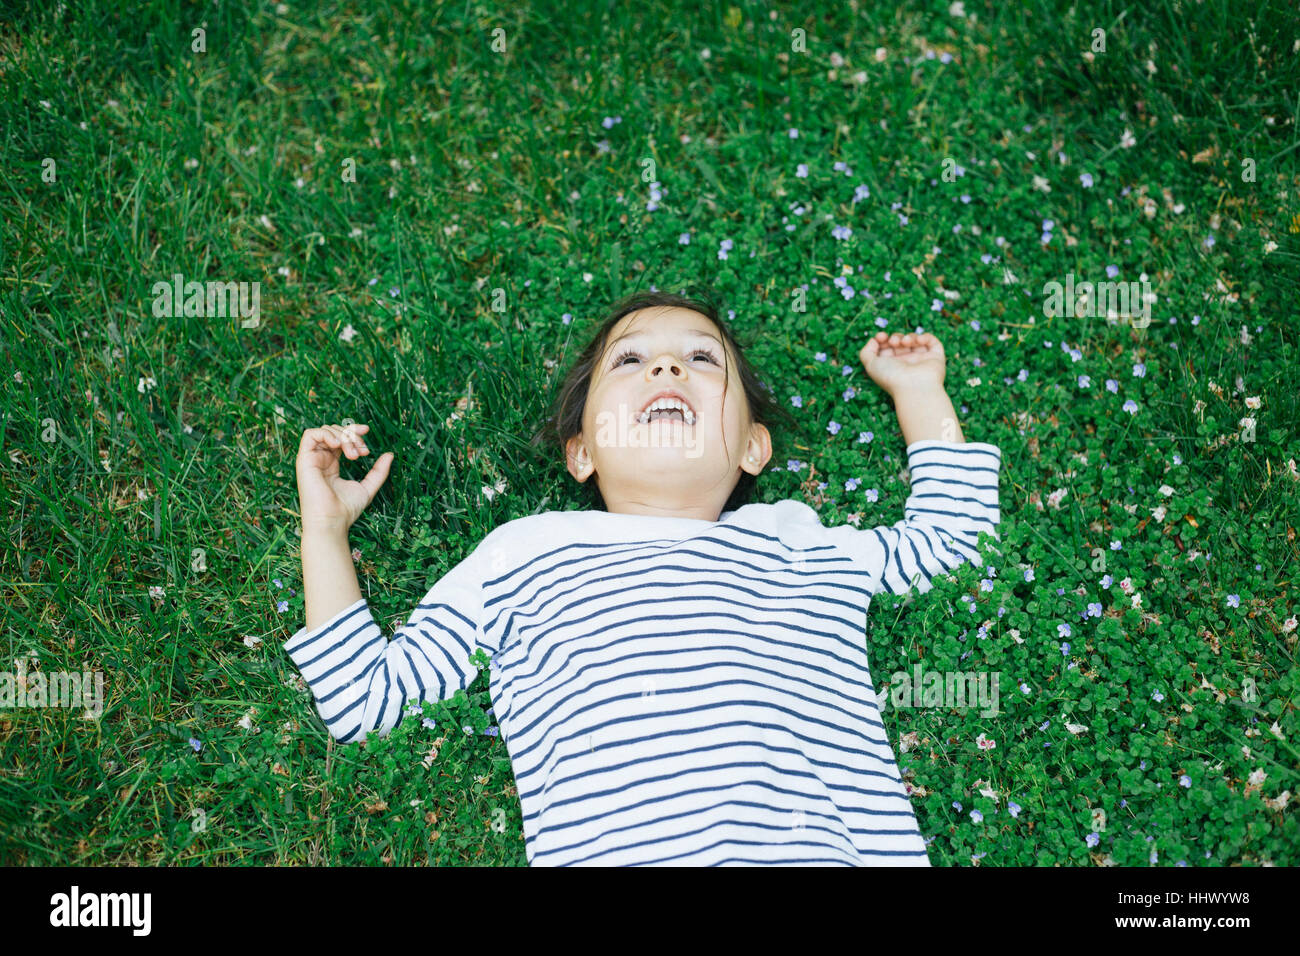 Child on the grass Stock Photo